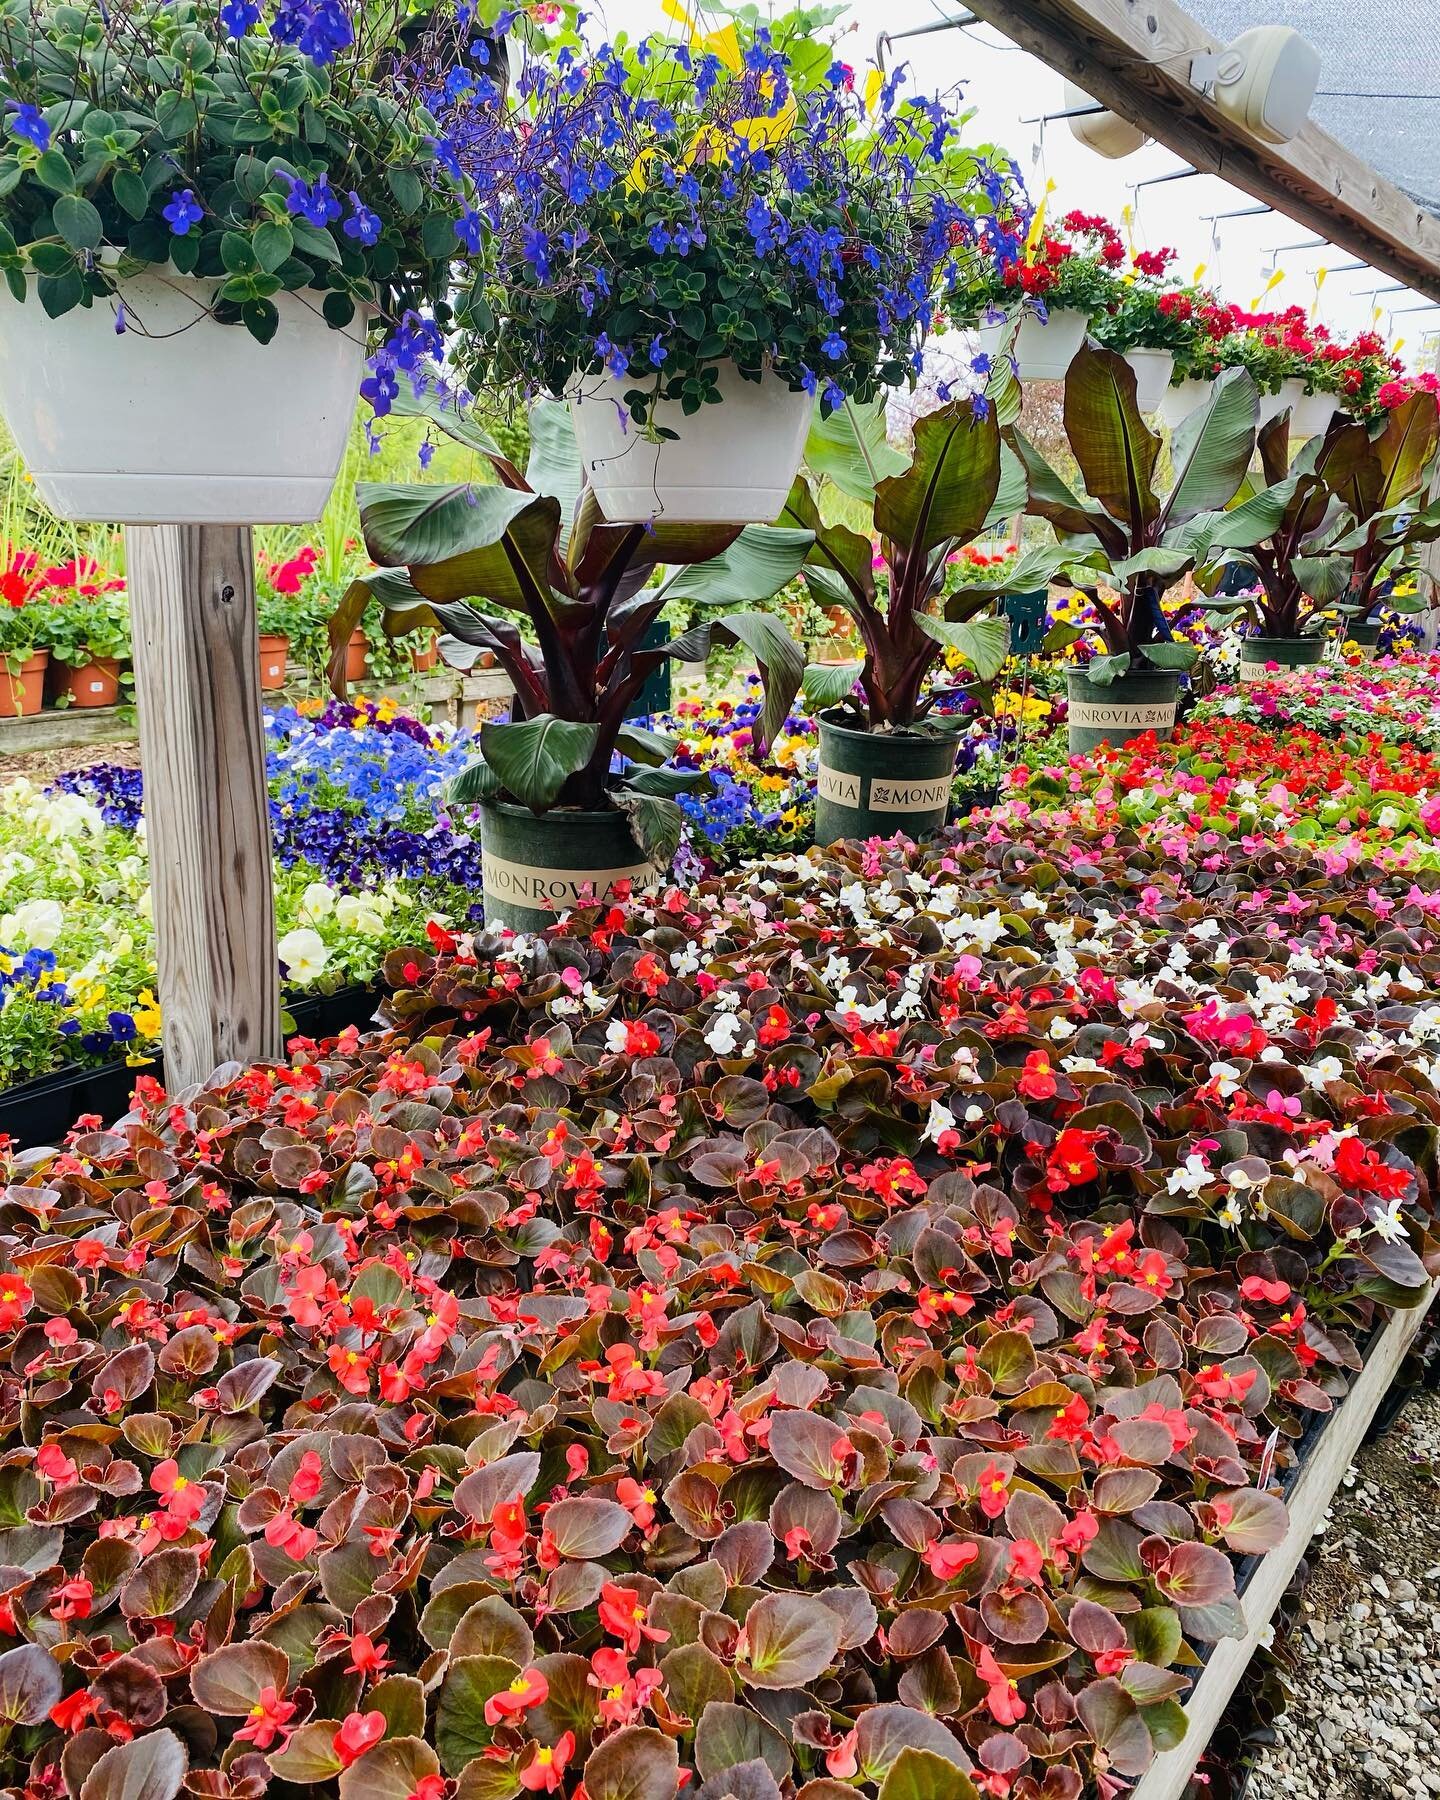 Happy Mother&rsquo;s Day weekend from Sol Haus! Spring planting in full swing. Sawyer garden center never disappoints. #solhausmichigan #solhausretreat #unionpier #harborcountrymi #puremichigan #sawyergardencenter #mothersday #springplanting #michiga